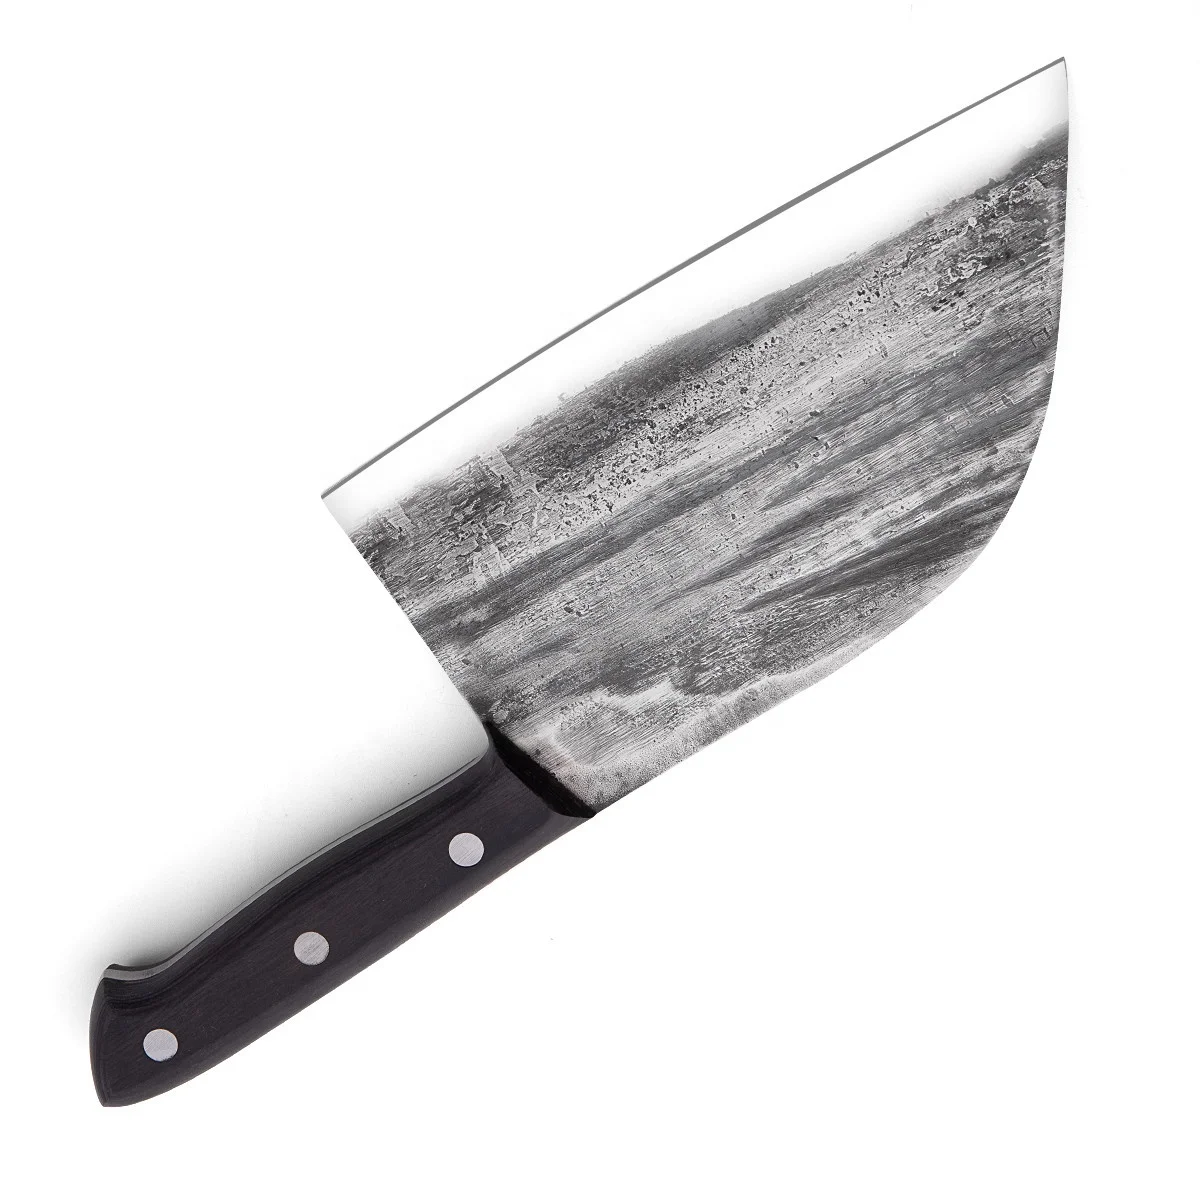 

7 inch Handmade Forged High carbon Clad Steel serbian chef Kitchen Cleaver Filleting Slicing Broad Butcher knife